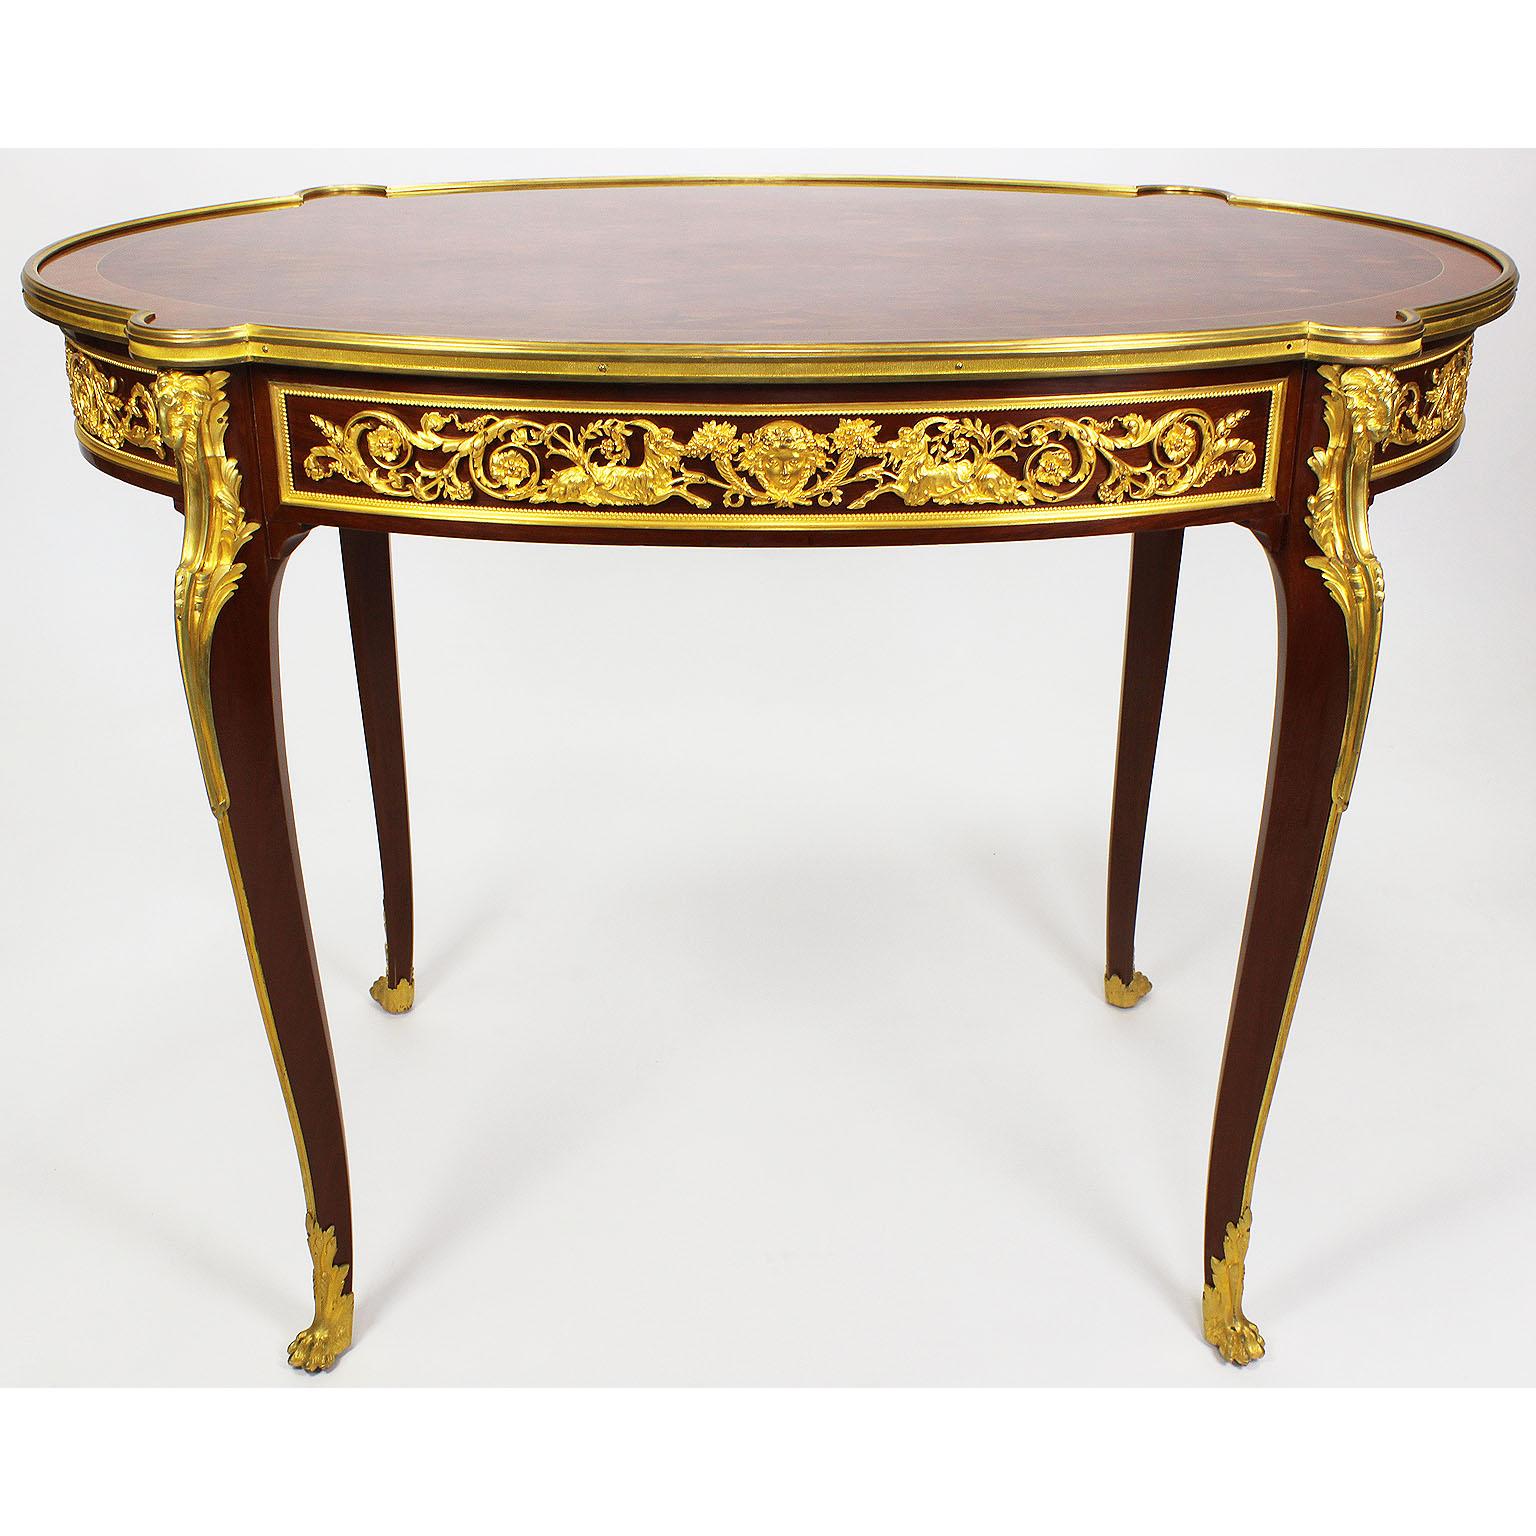 19th-20th Century Louis XV Gilt Bronze-Mounted Table, Francois Linke Attributed For Sale 6